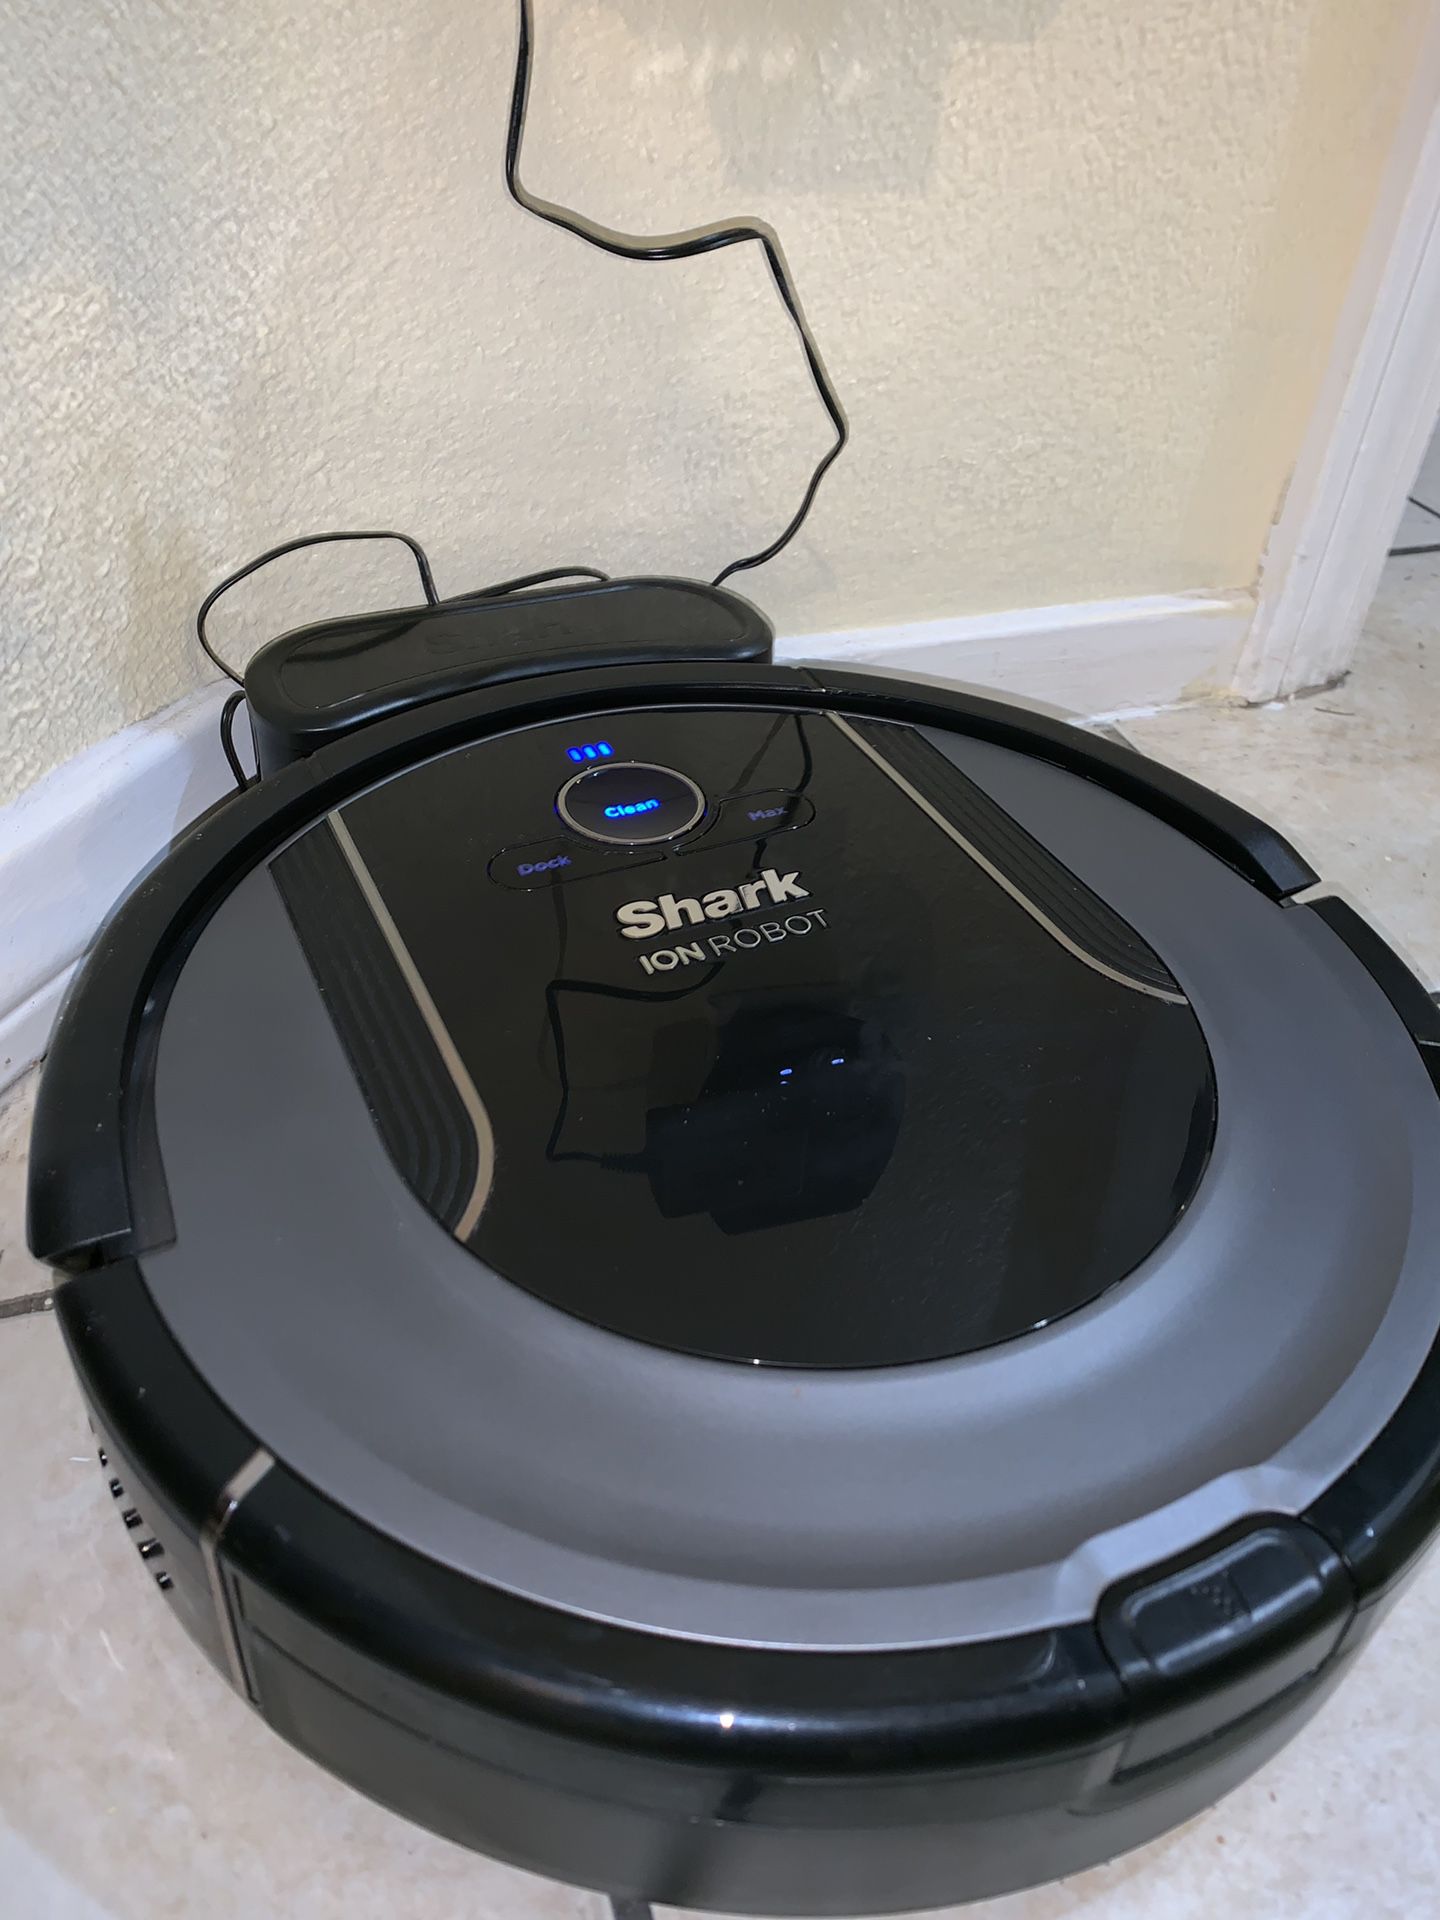 Shark ION RV850 robot vacuum cleaner in excellent condition WiFi connected